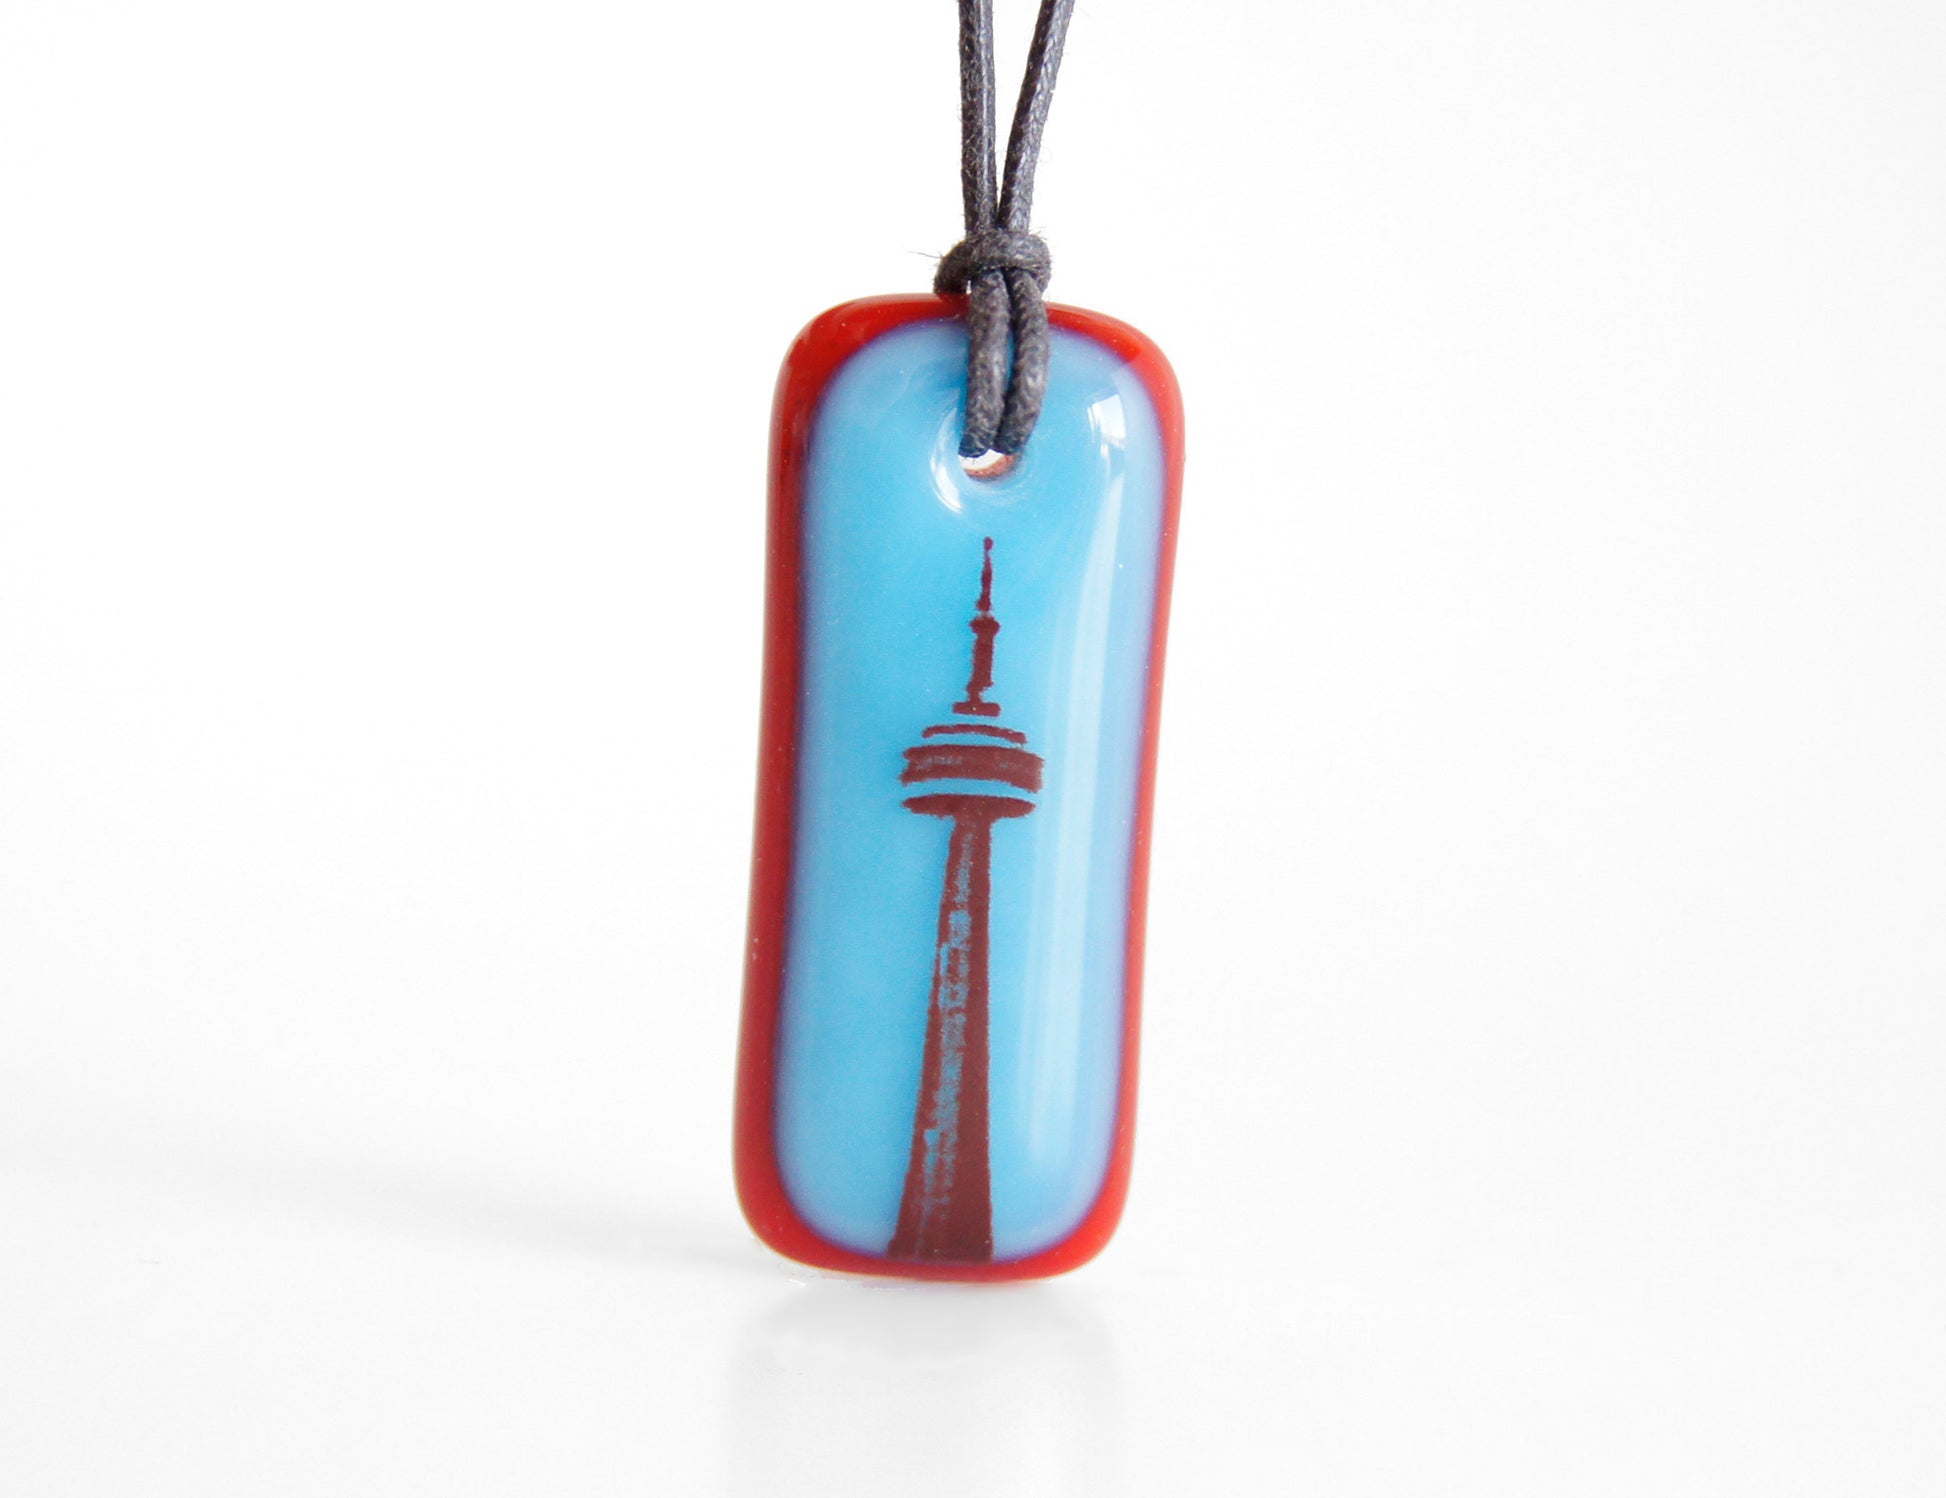 CN Tower necklace in aqua blue and red. 